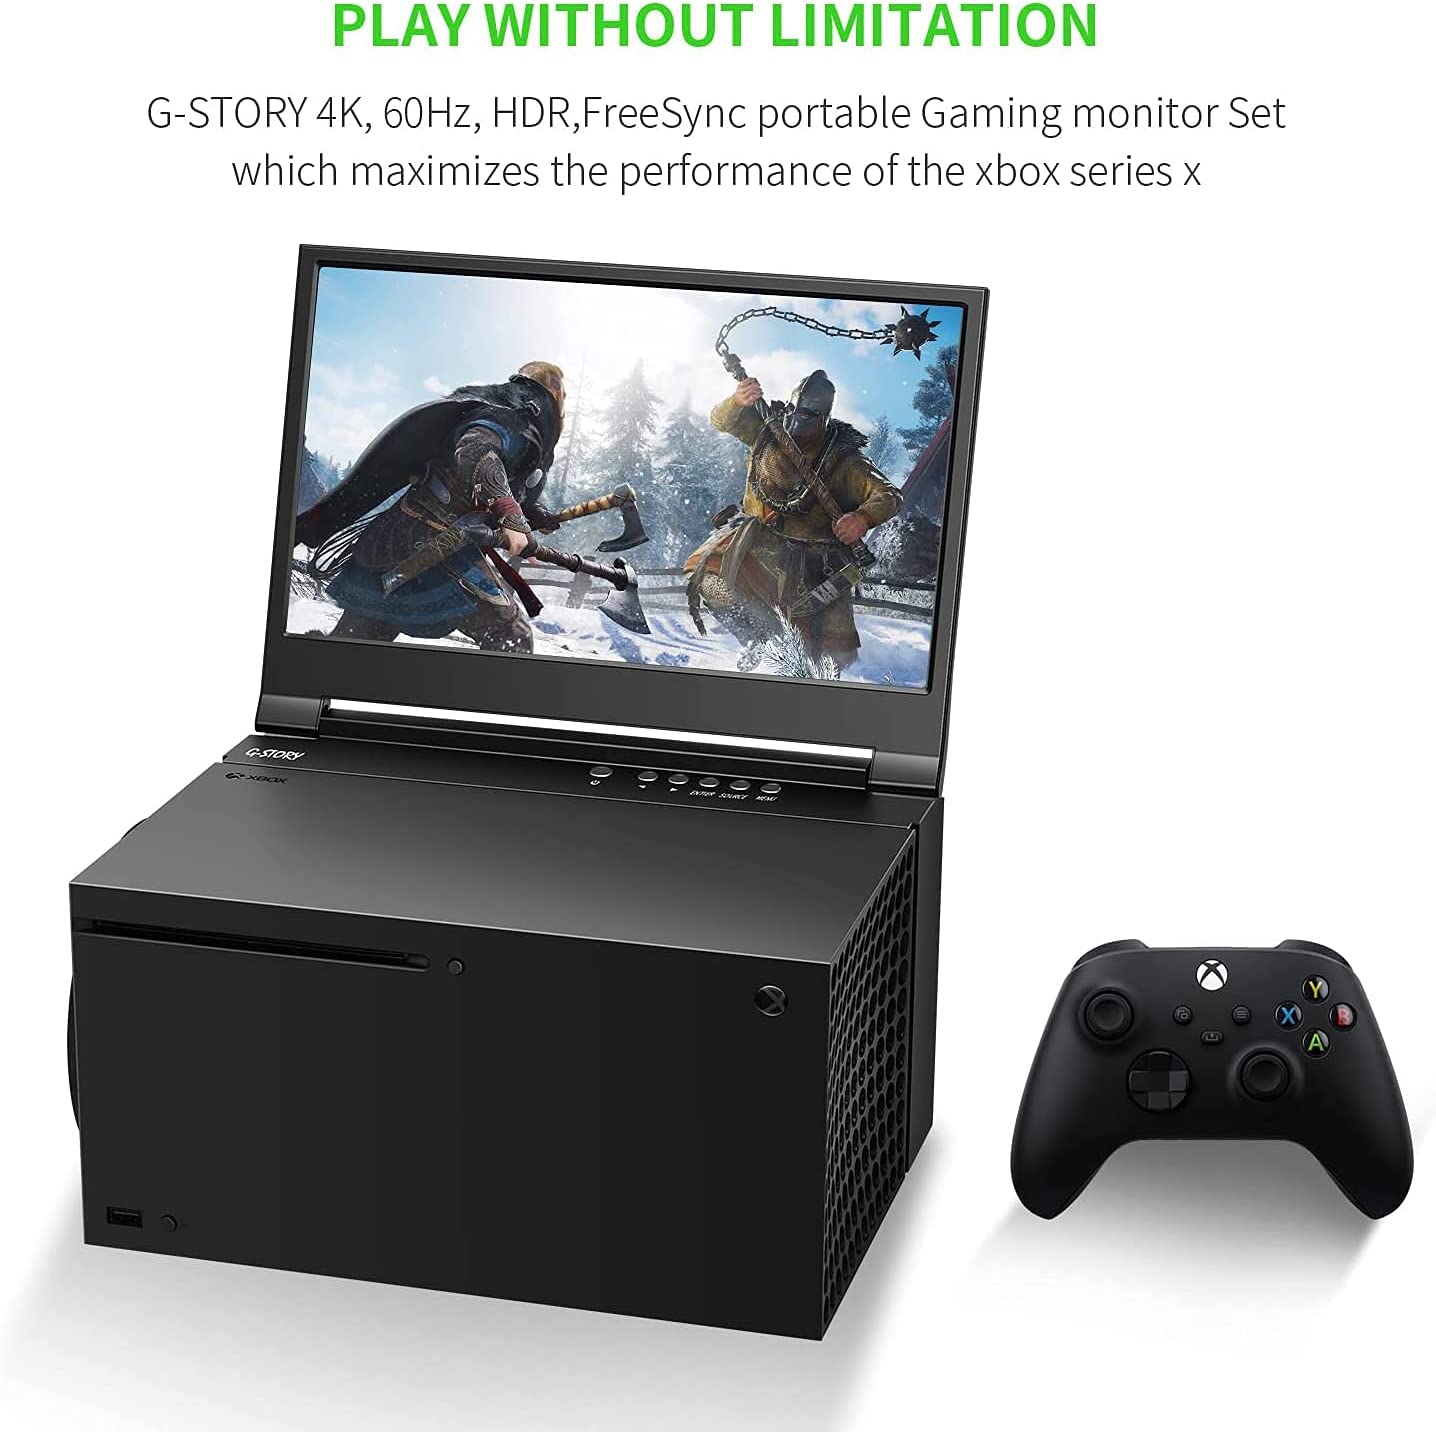 Copy of G-STORY 12.5‘’ Portable Monitor for Xbox Series X, UHD 1080p Portable Gaming Monitor